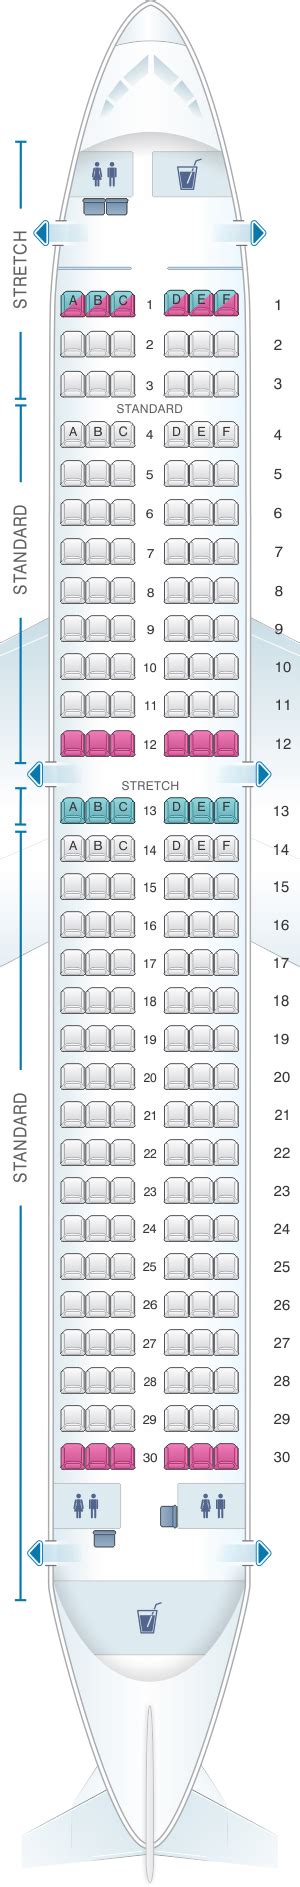 Seat Map Frontier Airlines Airbus A320 180pax Air Transat Hainan